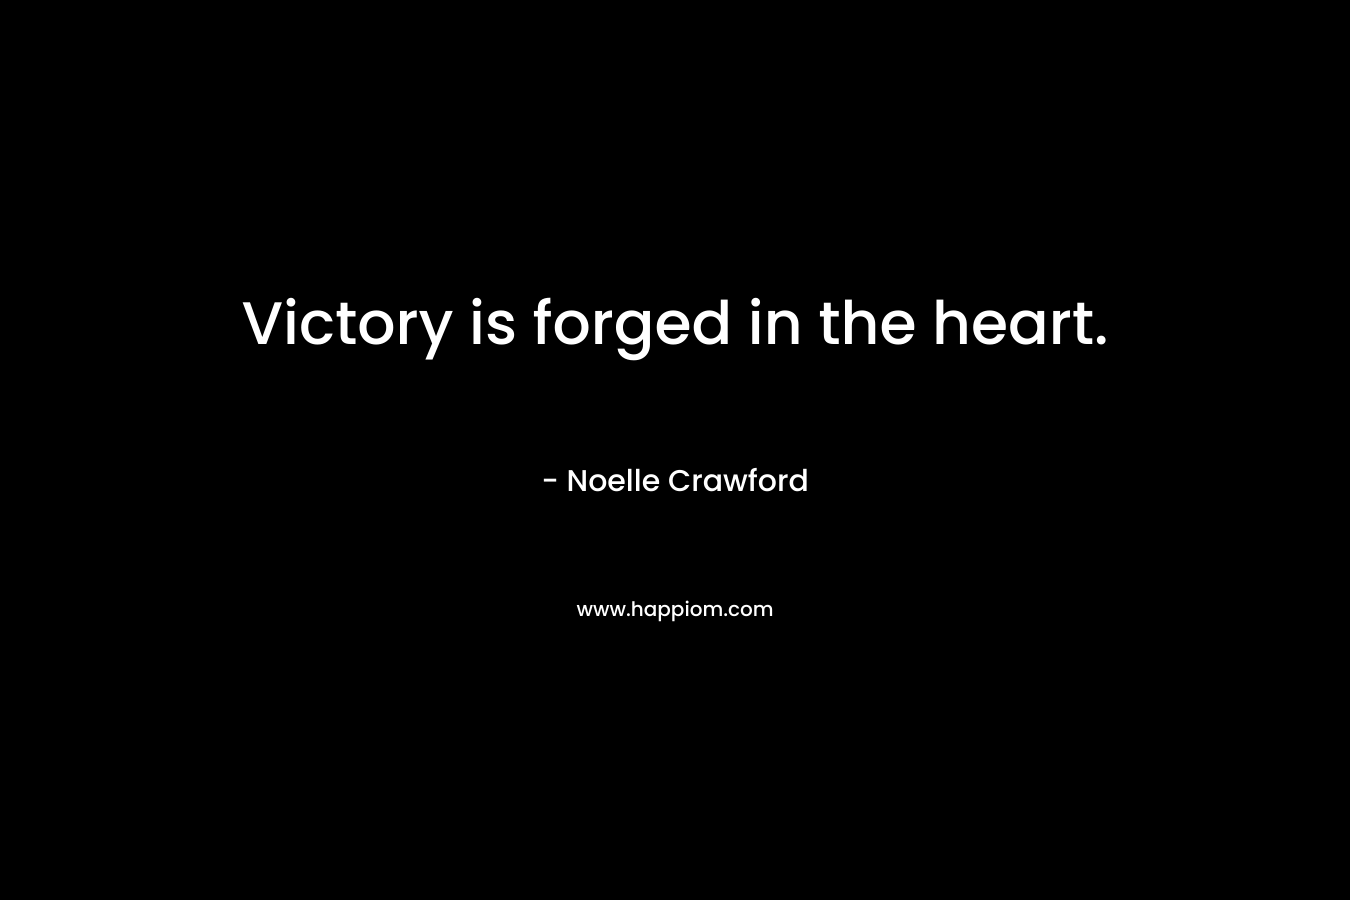 Victory is forged in the heart. – Noelle Crawford